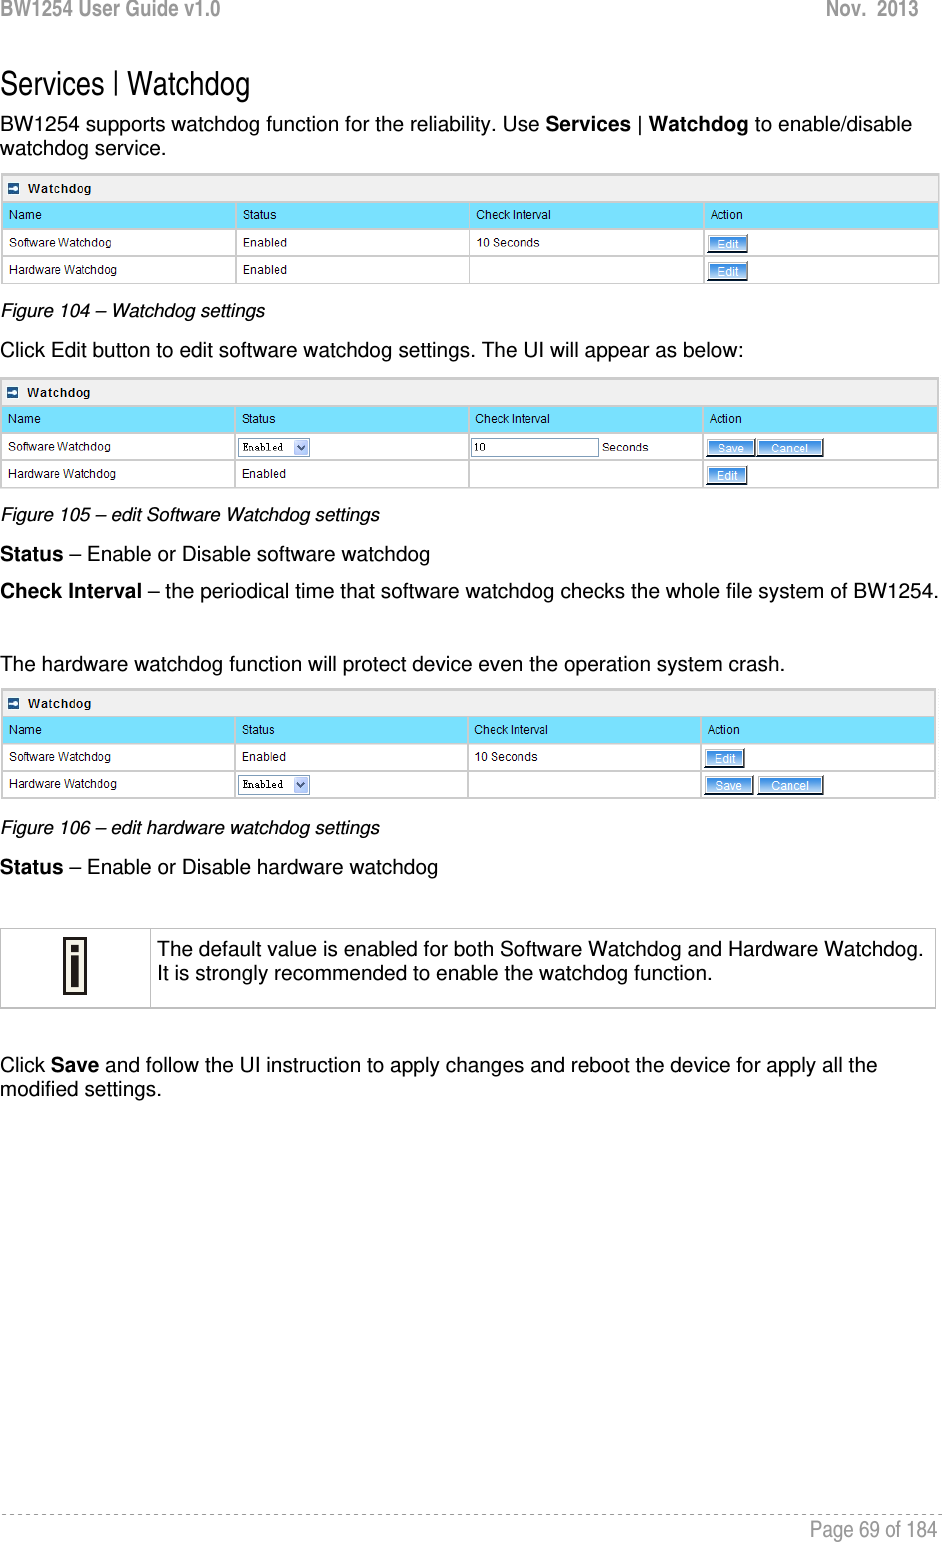 BW1254 User Guide v1.0  Nov.  2013     Page 69 of 184   Services | Watchdog BW1254 supports watchdog function for the reliability. Use Services | Watchdog to enable/disable watchdog service.   Figure 104 – Watchdog settings Click Edit button to edit software watchdog settings. The UI will appear as below:  Figure 105 – edit Software Watchdog settings Status – Enable or Disable software watchdog Check Interval – the periodical time that software watchdog checks the whole file system of BW1254.   The hardware watchdog function will protect device even the operation system crash.  Figure 106 – edit hardware watchdog settings Status – Enable or Disable hardware watchdog   The default value is enabled for both Software Watchdog and Hardware Watchdog. It is strongly recommended to enable the watchdog function.   Click Save and follow the UI instruction to apply changes and reboot the device for apply all the modified settings.   